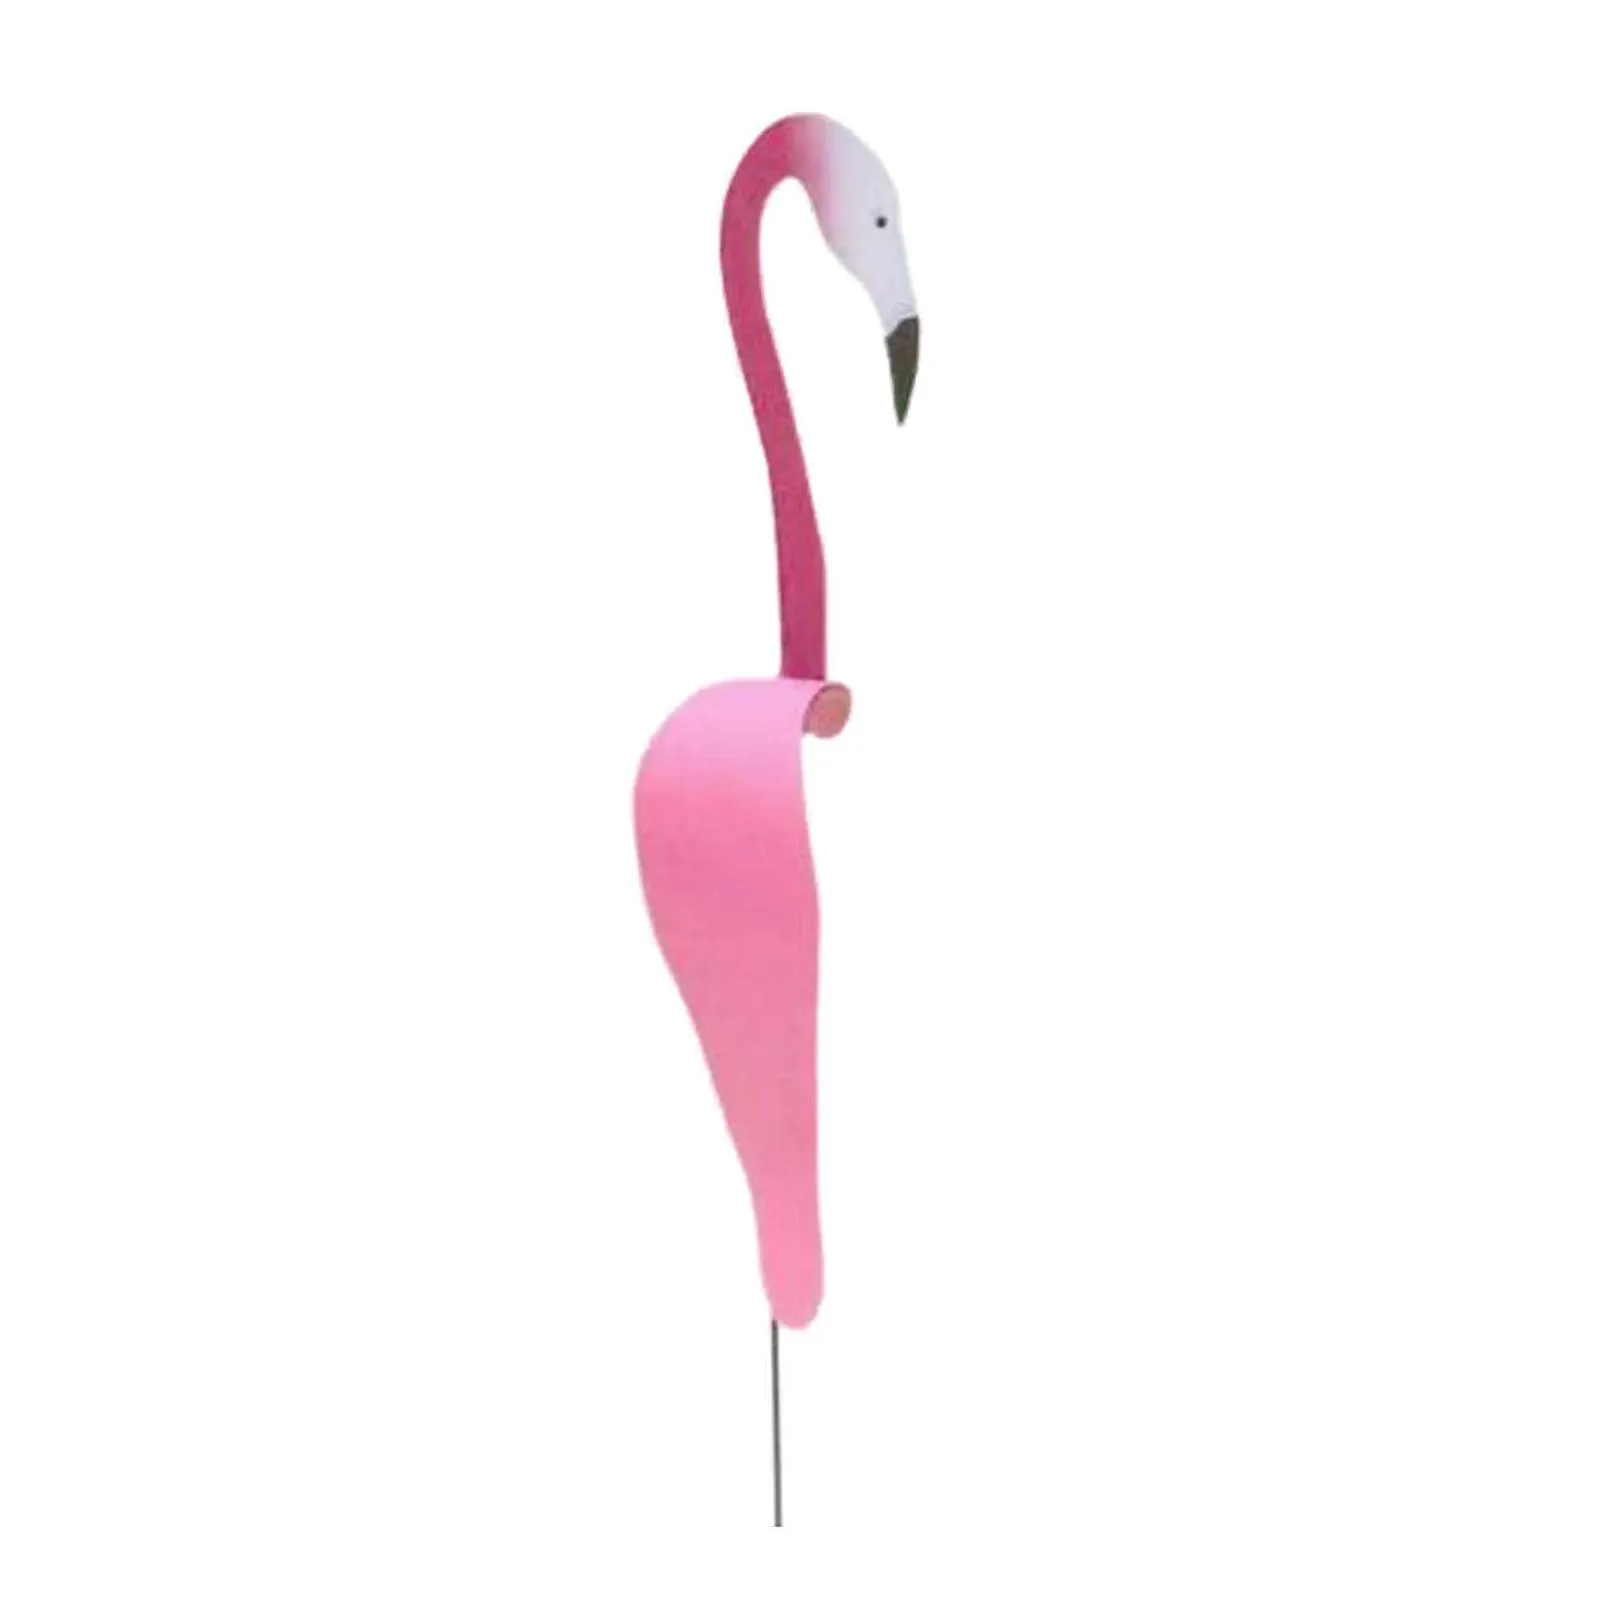 Garden Decorations Garden Flamingo Wind Indicator Whimsical Rotating Bird Scpture Absolutely Gorgeous Unique Dynamic Yard Decoration D Dh08E